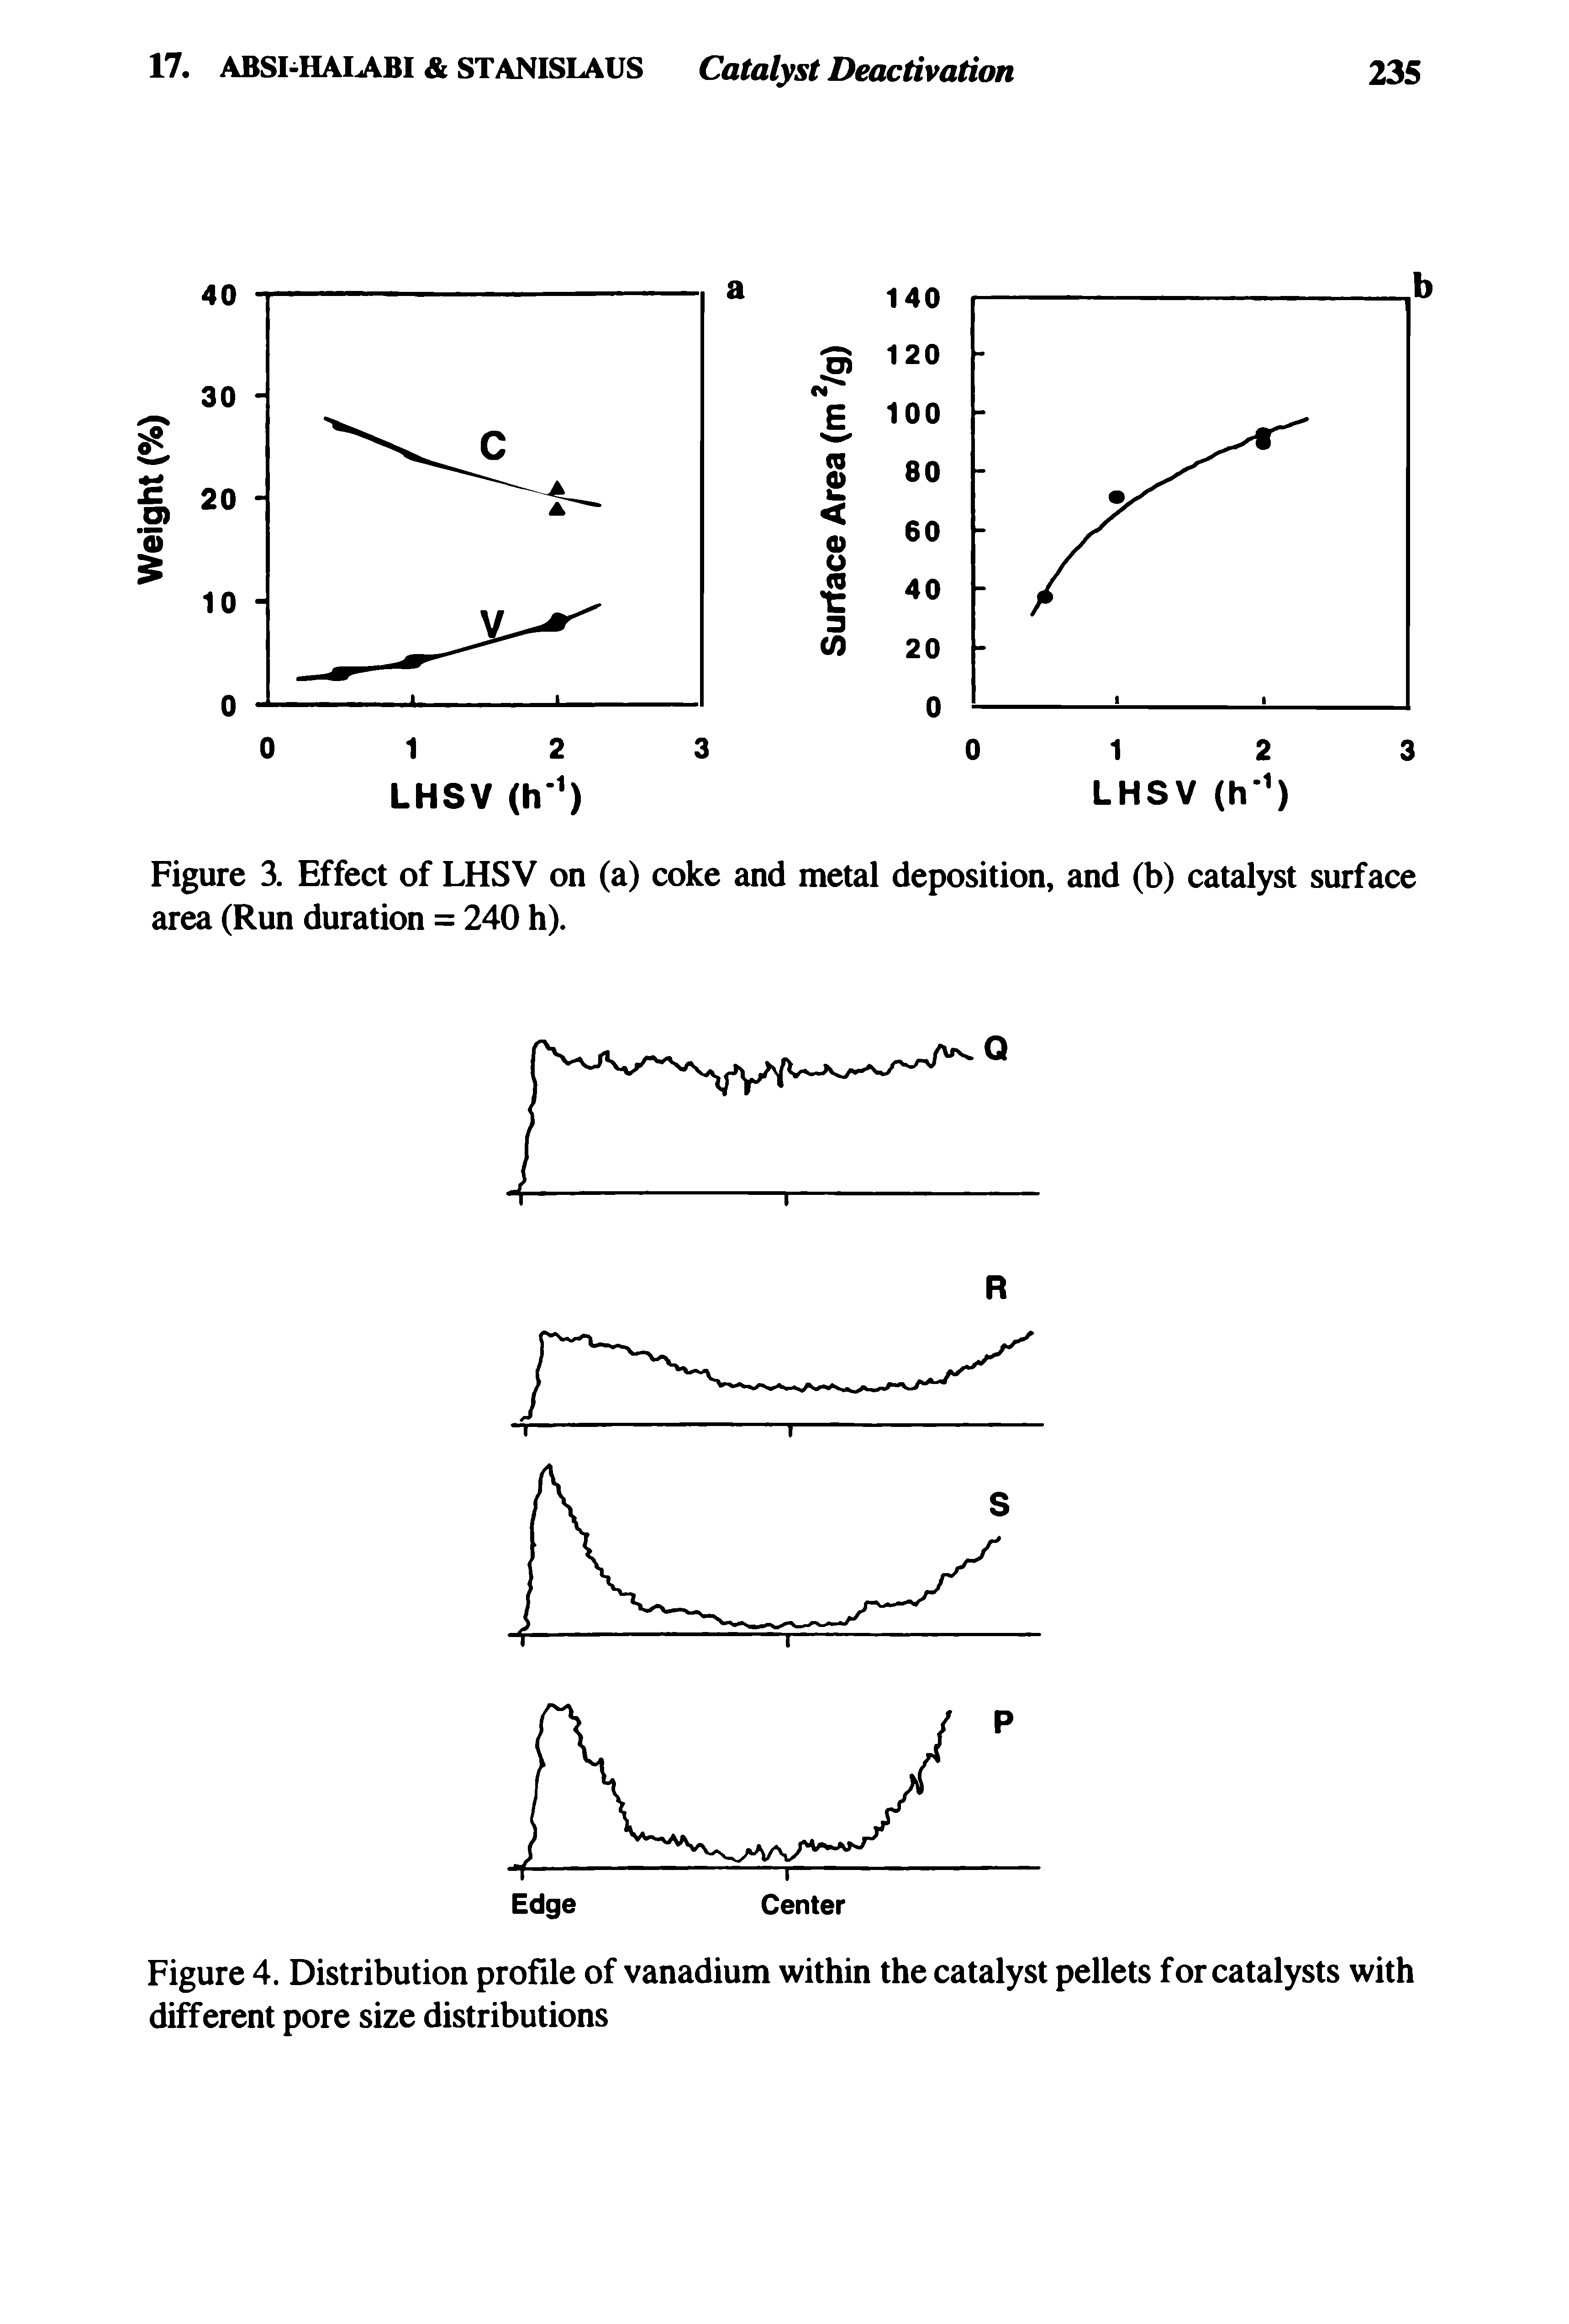 Figure 4. Distribution profile of vanadium within the catalyst pellets for catalysts with different pore size distributions...